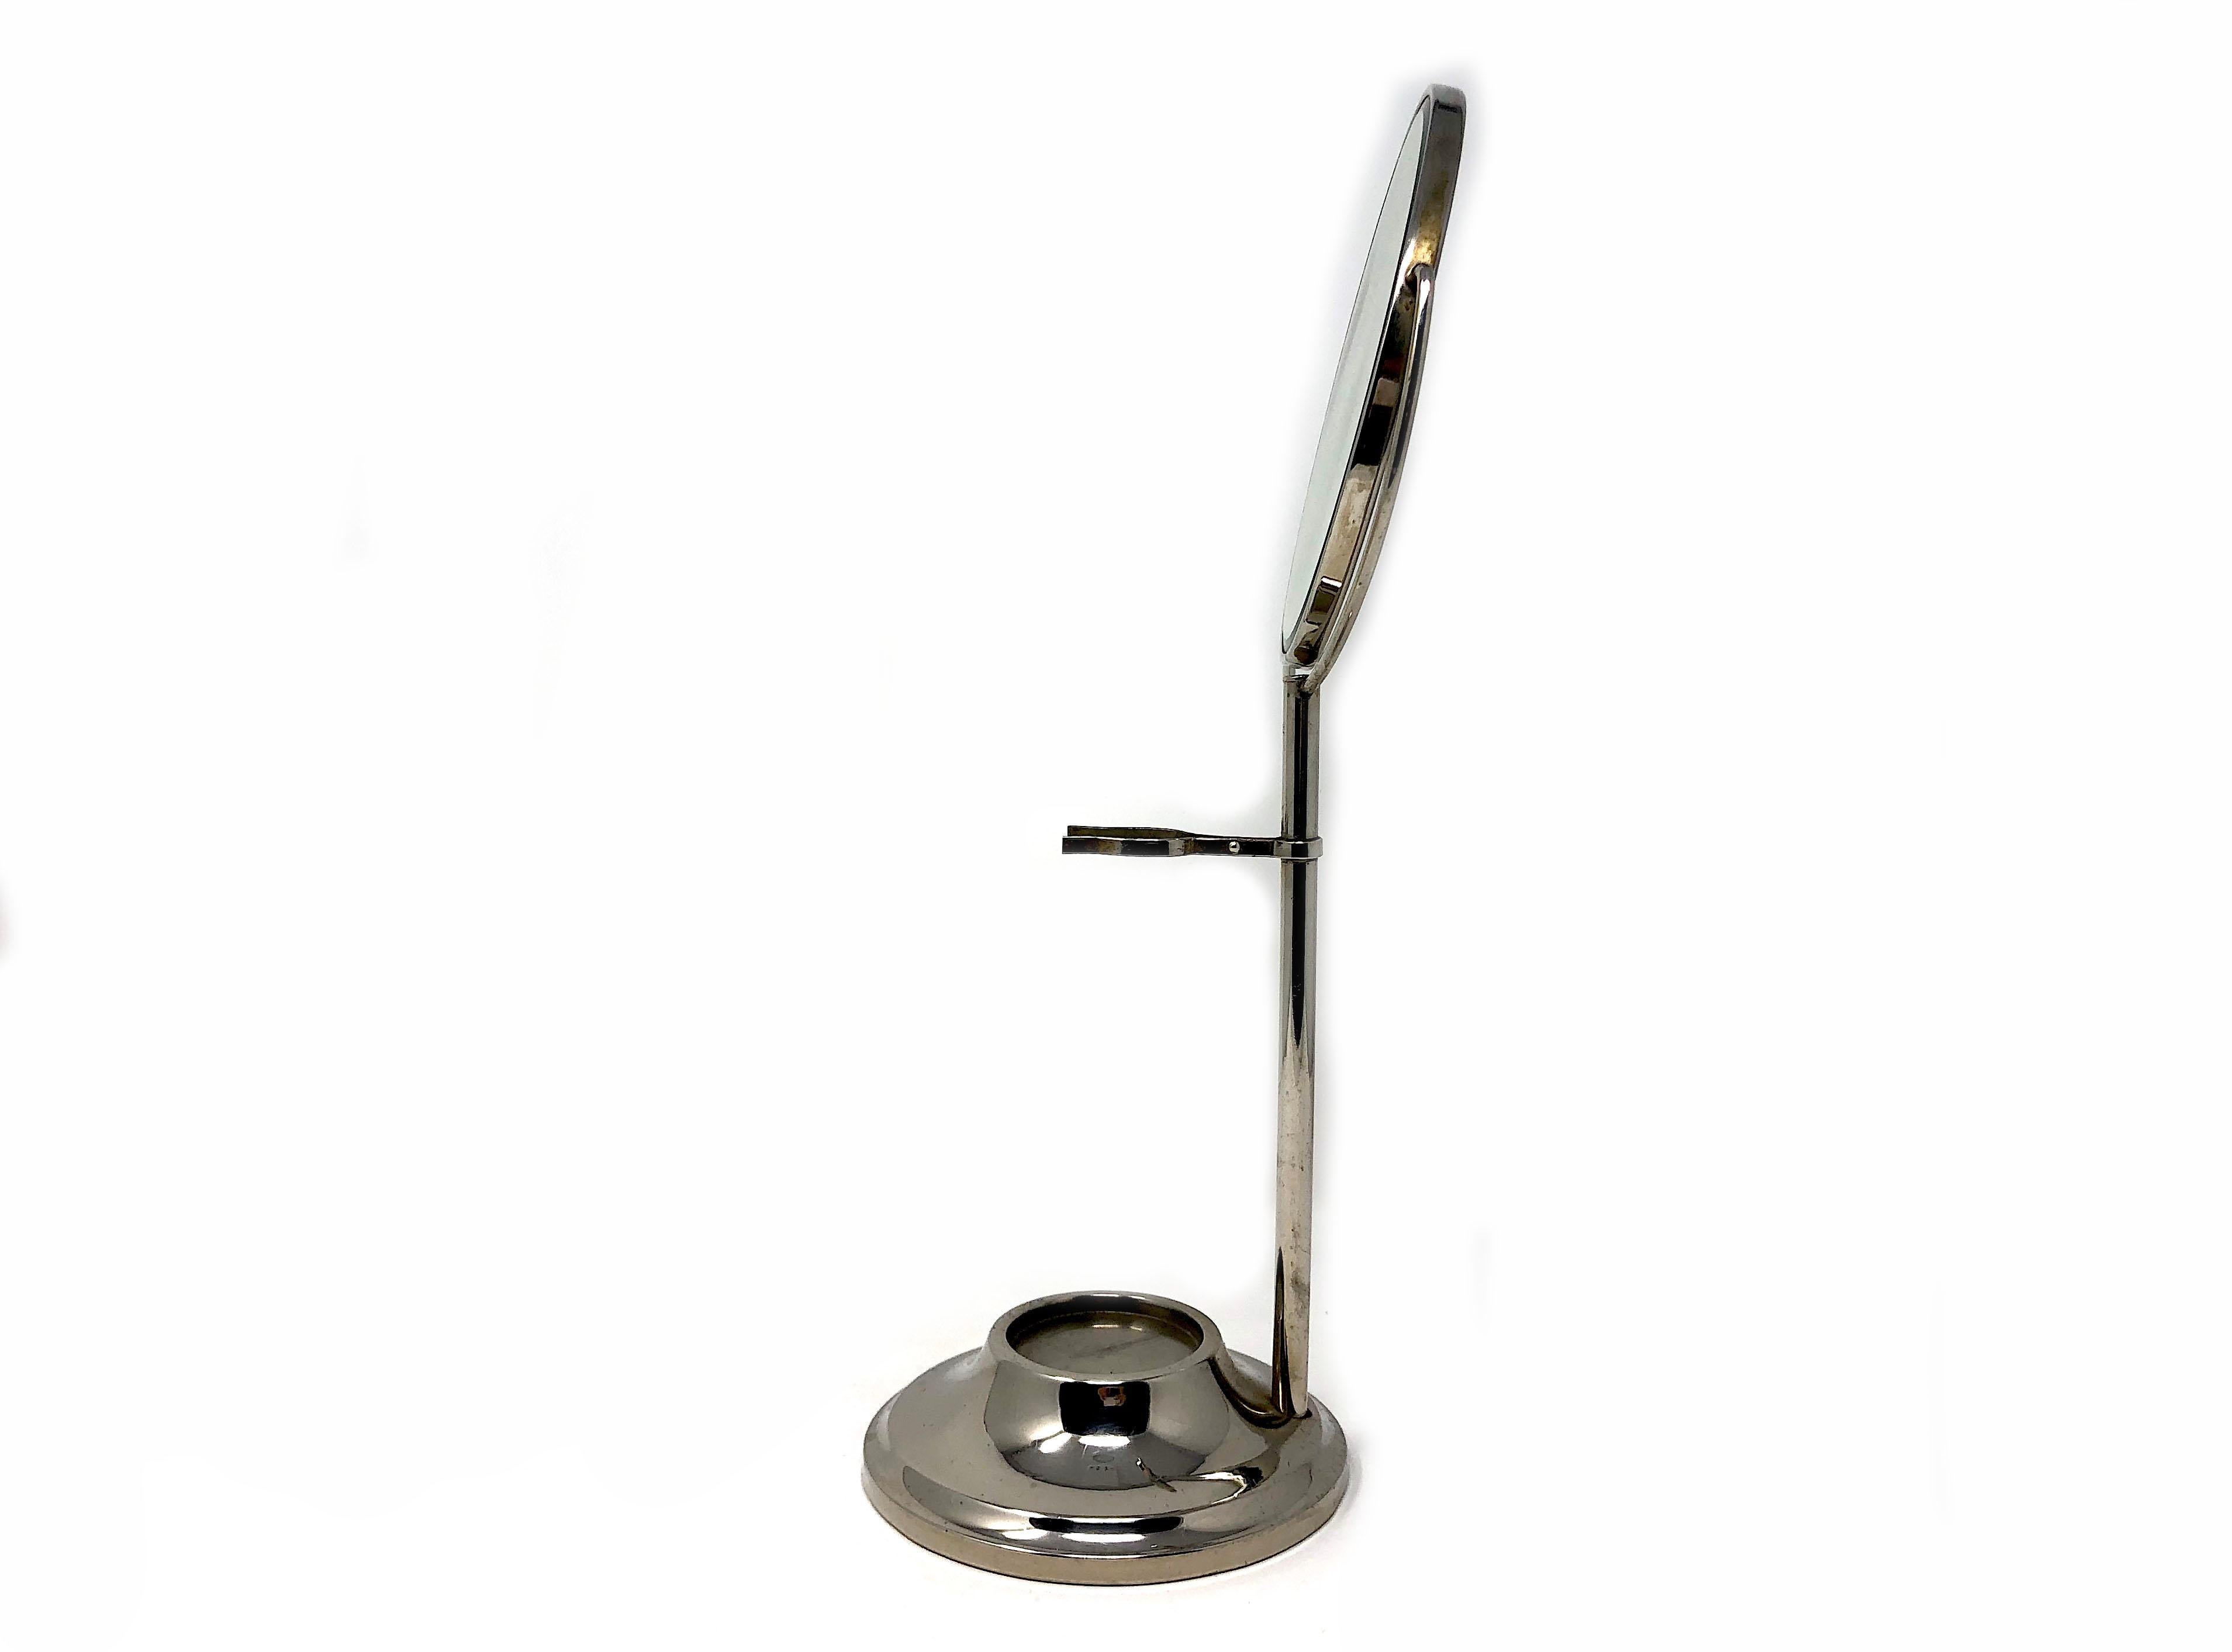 American Antique Art Deco Chrome Silver Pedestal Shaving Mirror on Stand with Holder For Sale